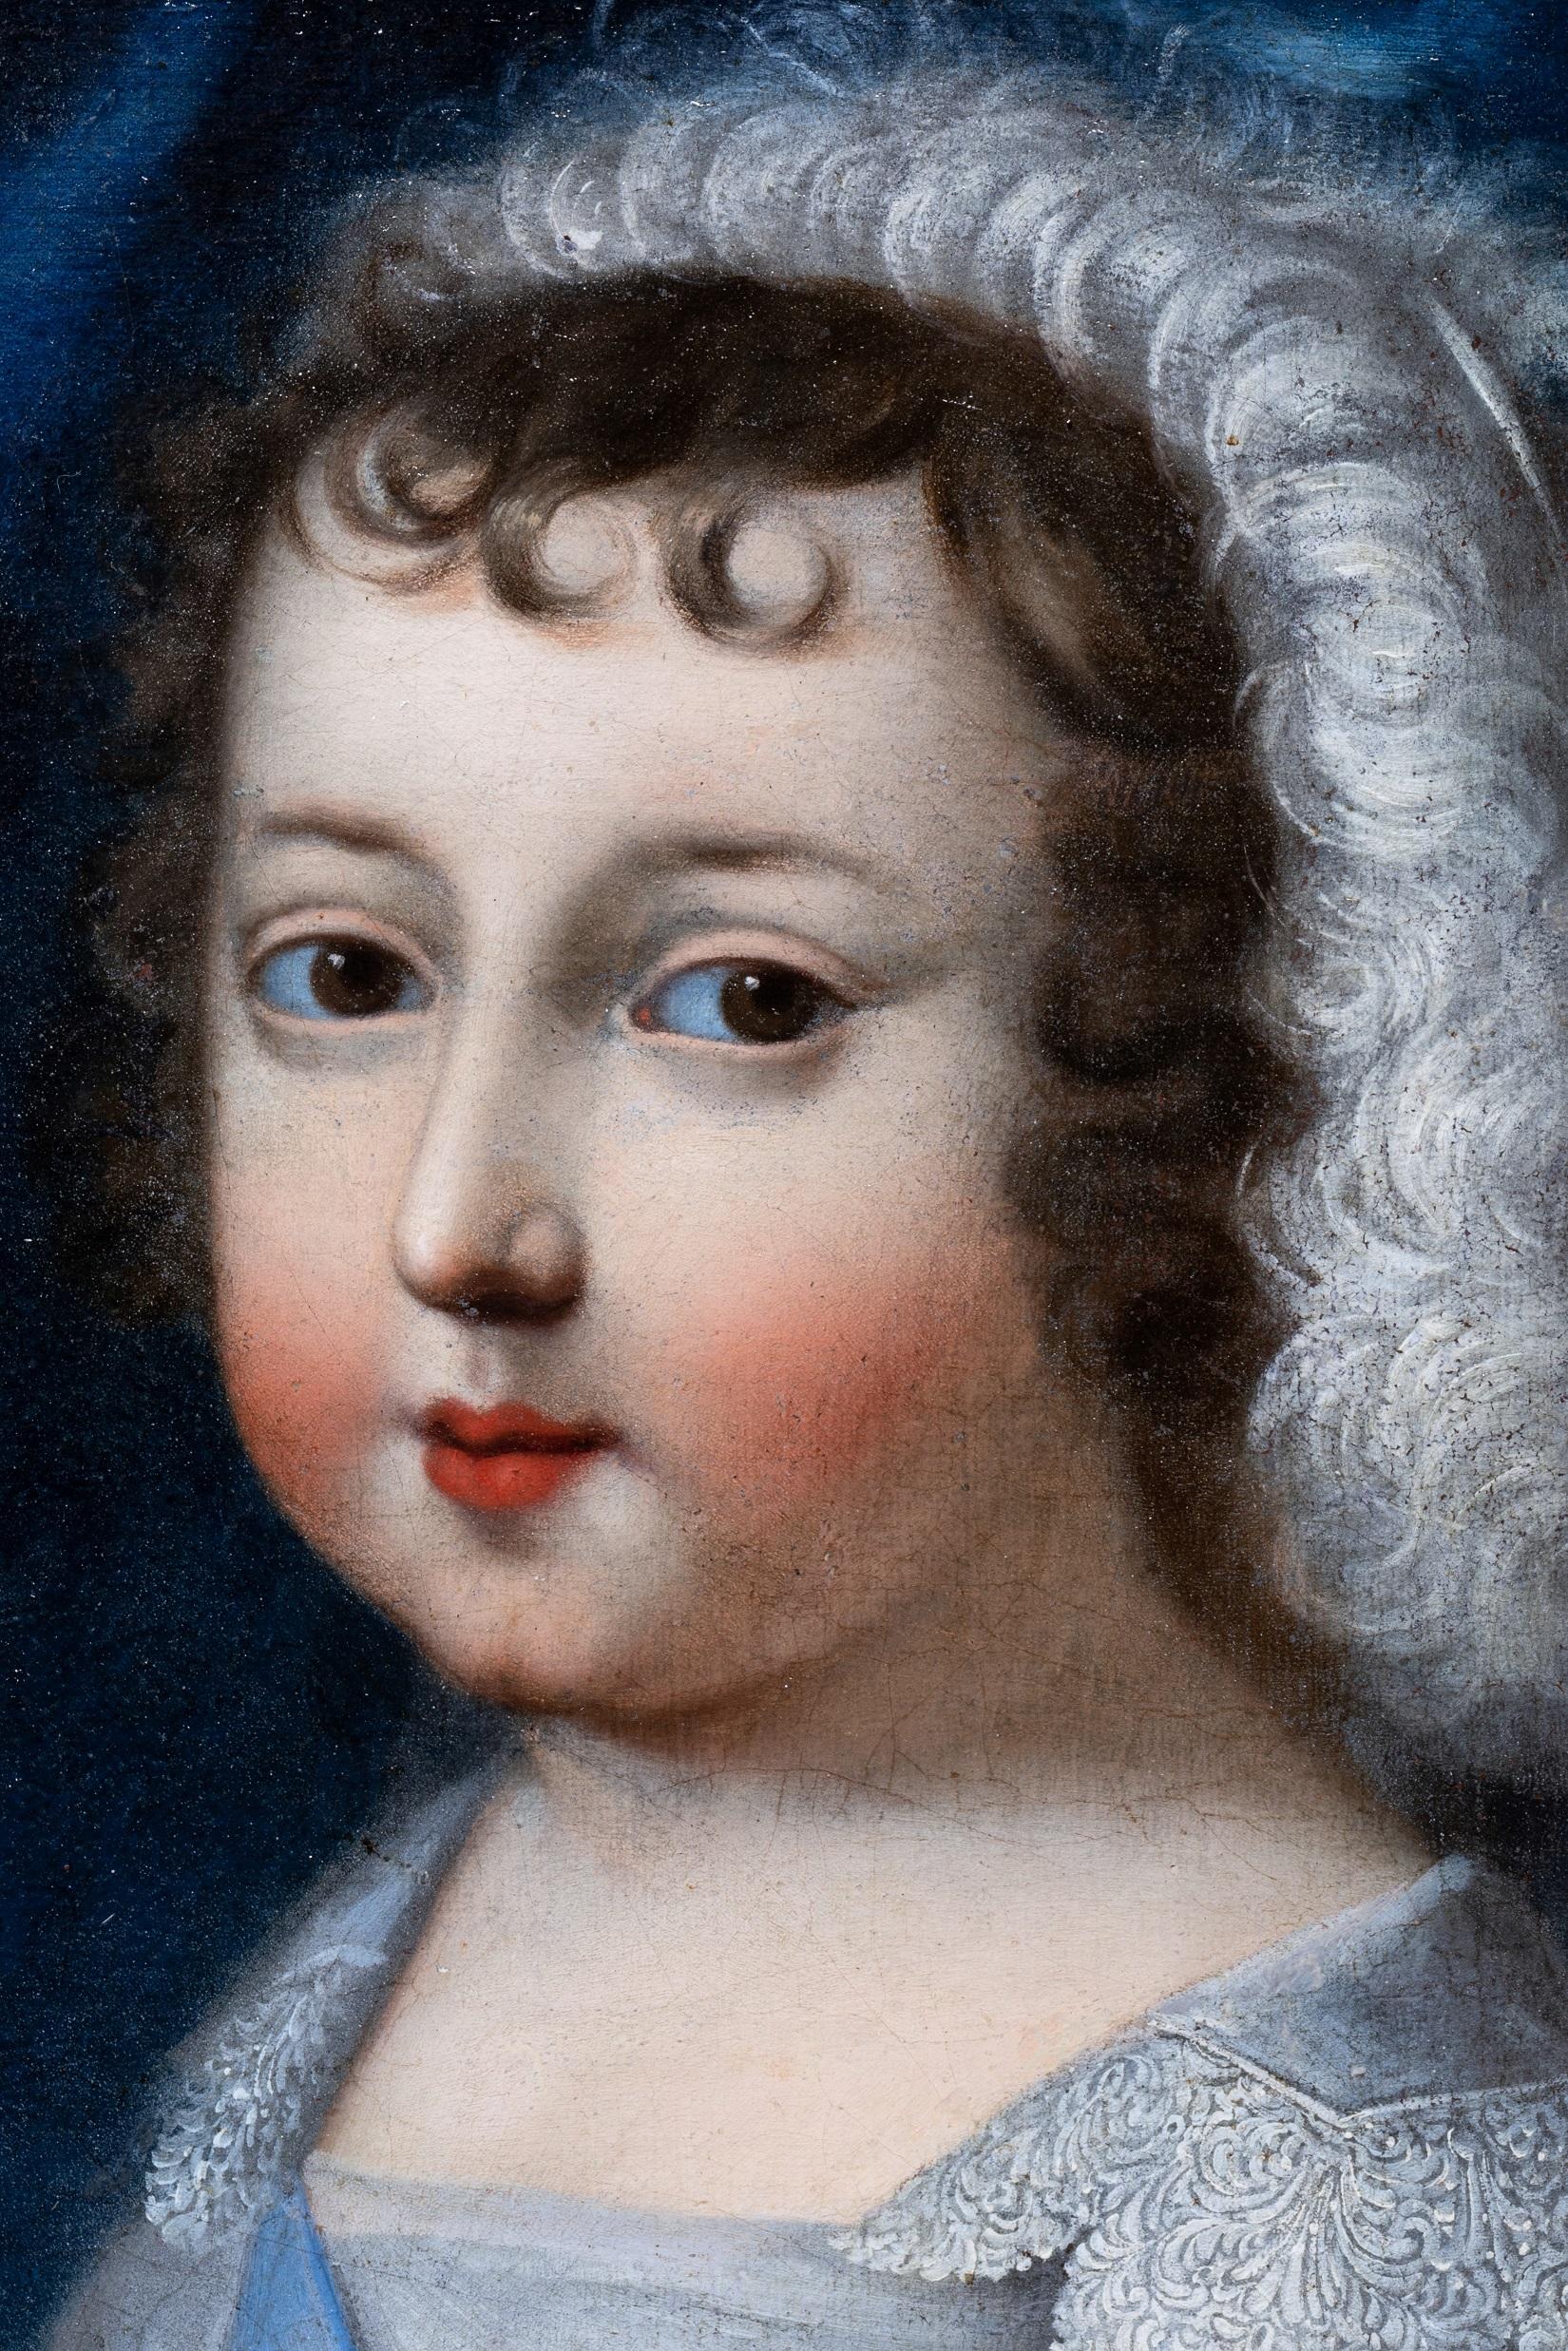 Rare double portrait depicting Louis XIV and his brother Philippe de France as children.
17th century French School, circa 1645, attributed to Charles and Henri Beaubrun.
Oil on canvas, dimensions: h. 48.03, w. 35.43 in.
Important 17th century